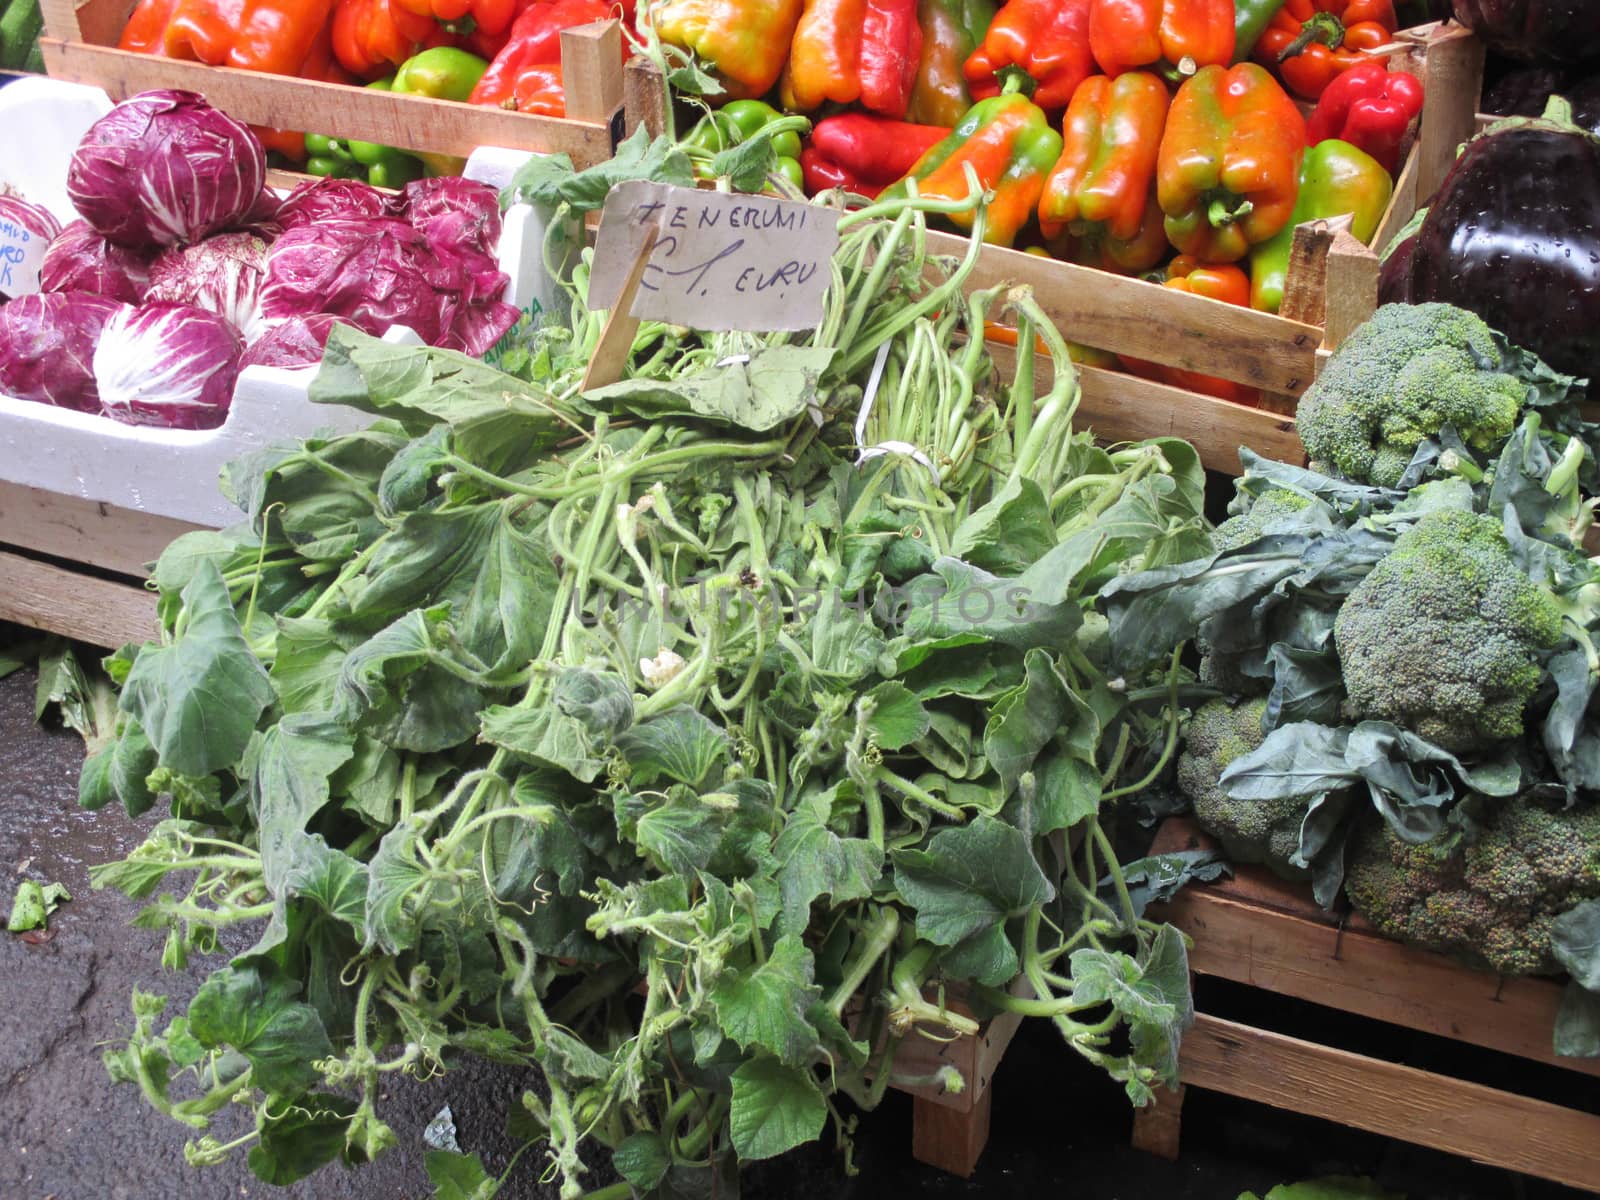 Beautiful fresh vegetables on the counter market